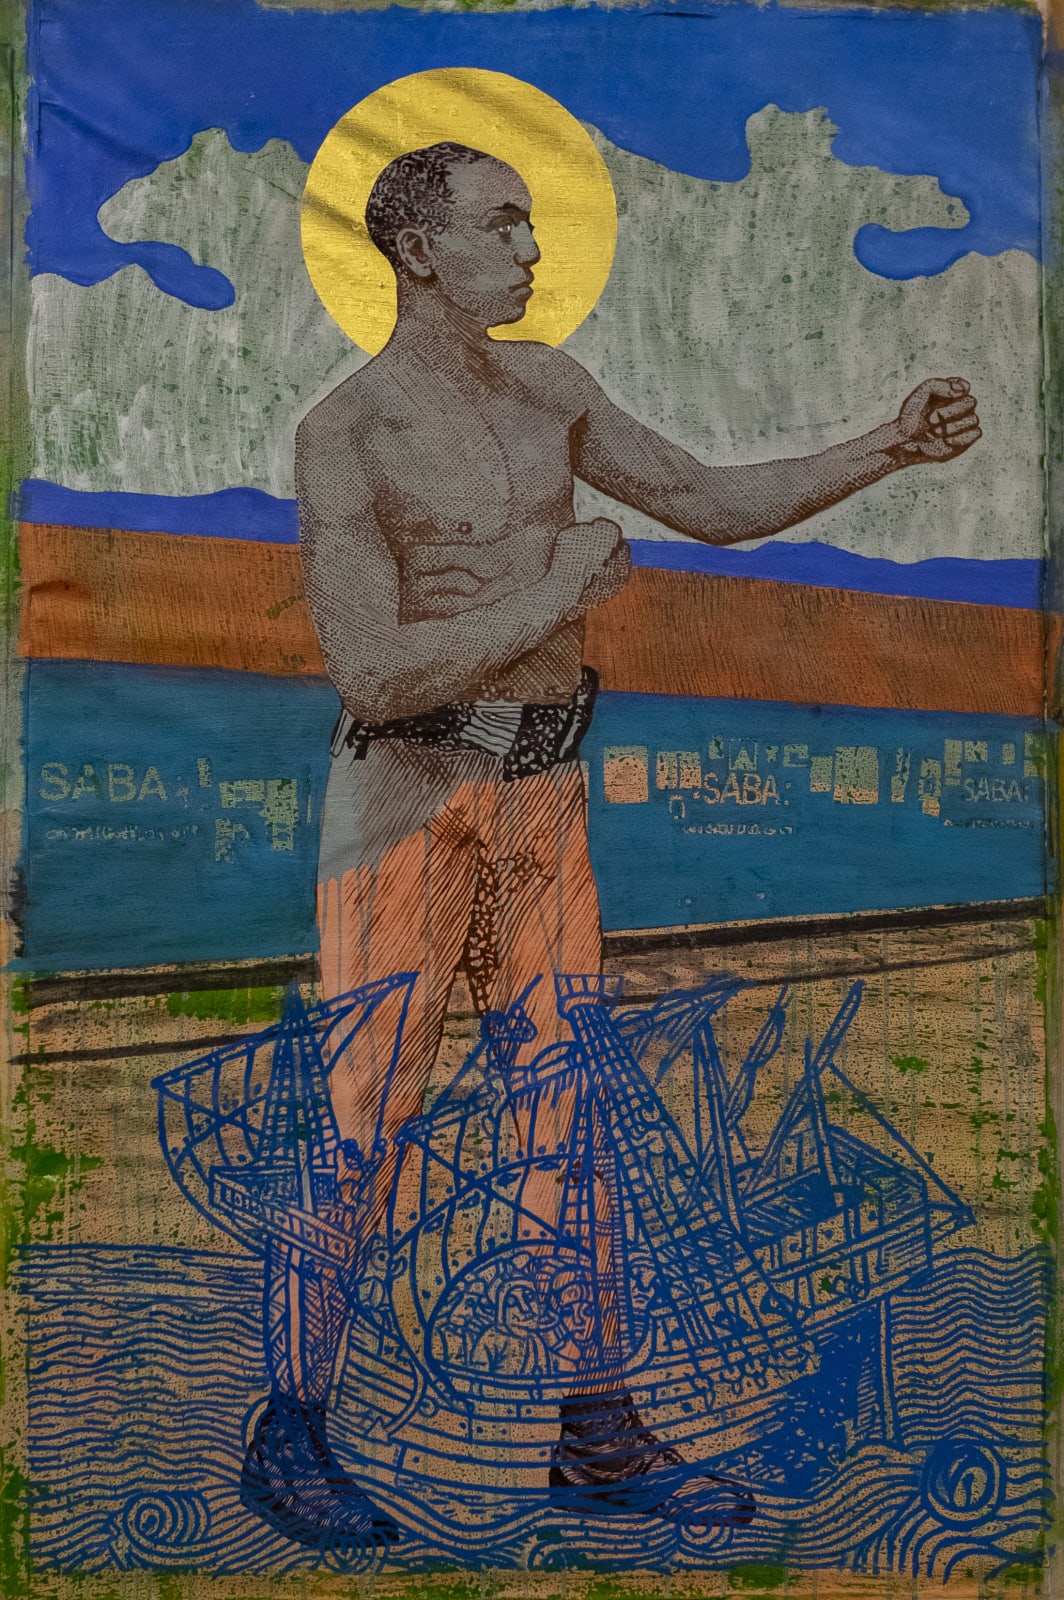 Godfried Donkor, St George, 2019